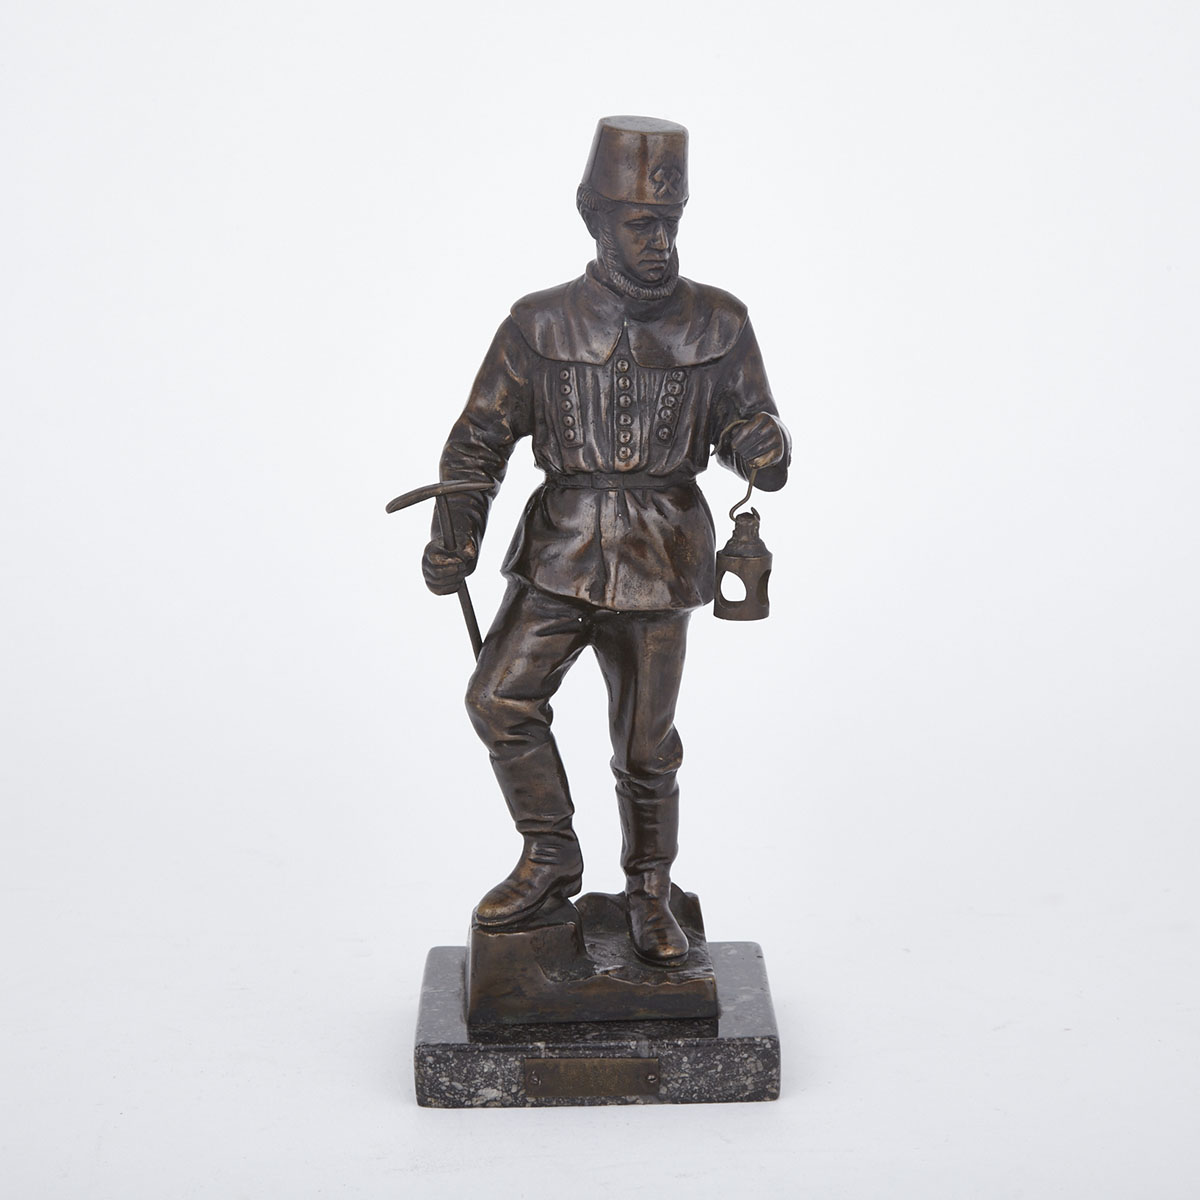 Continental Bronze Figure of a Miner, attributed to V. E. Torf, early 20th century